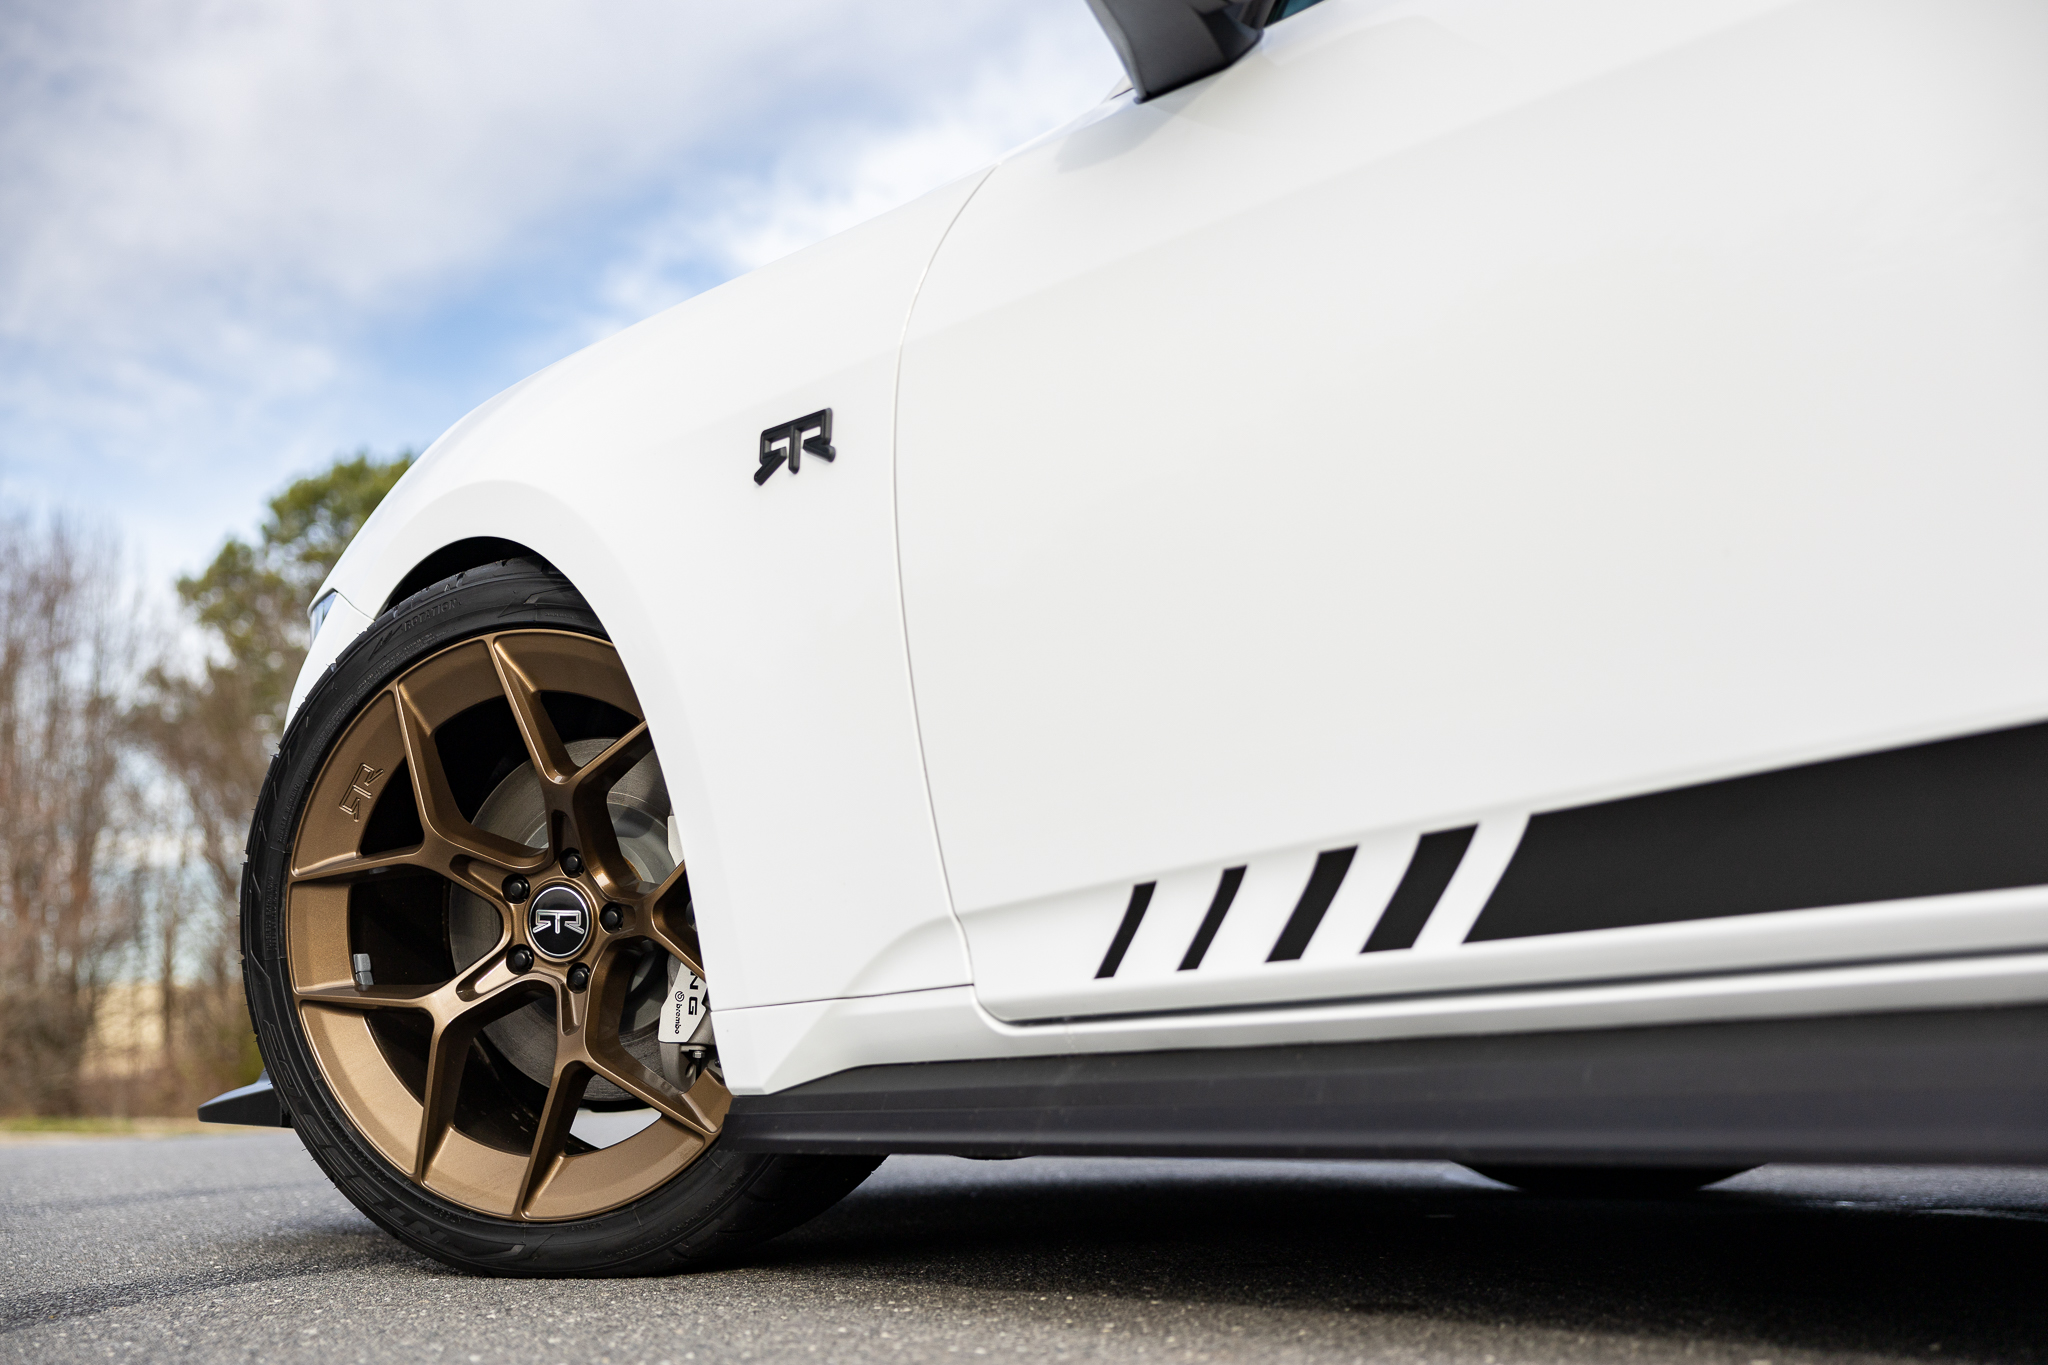 S650 Mustang New RTR Wheels! // RTR Aero 5 Wheels Available in 2 New Colors! JCOL2411